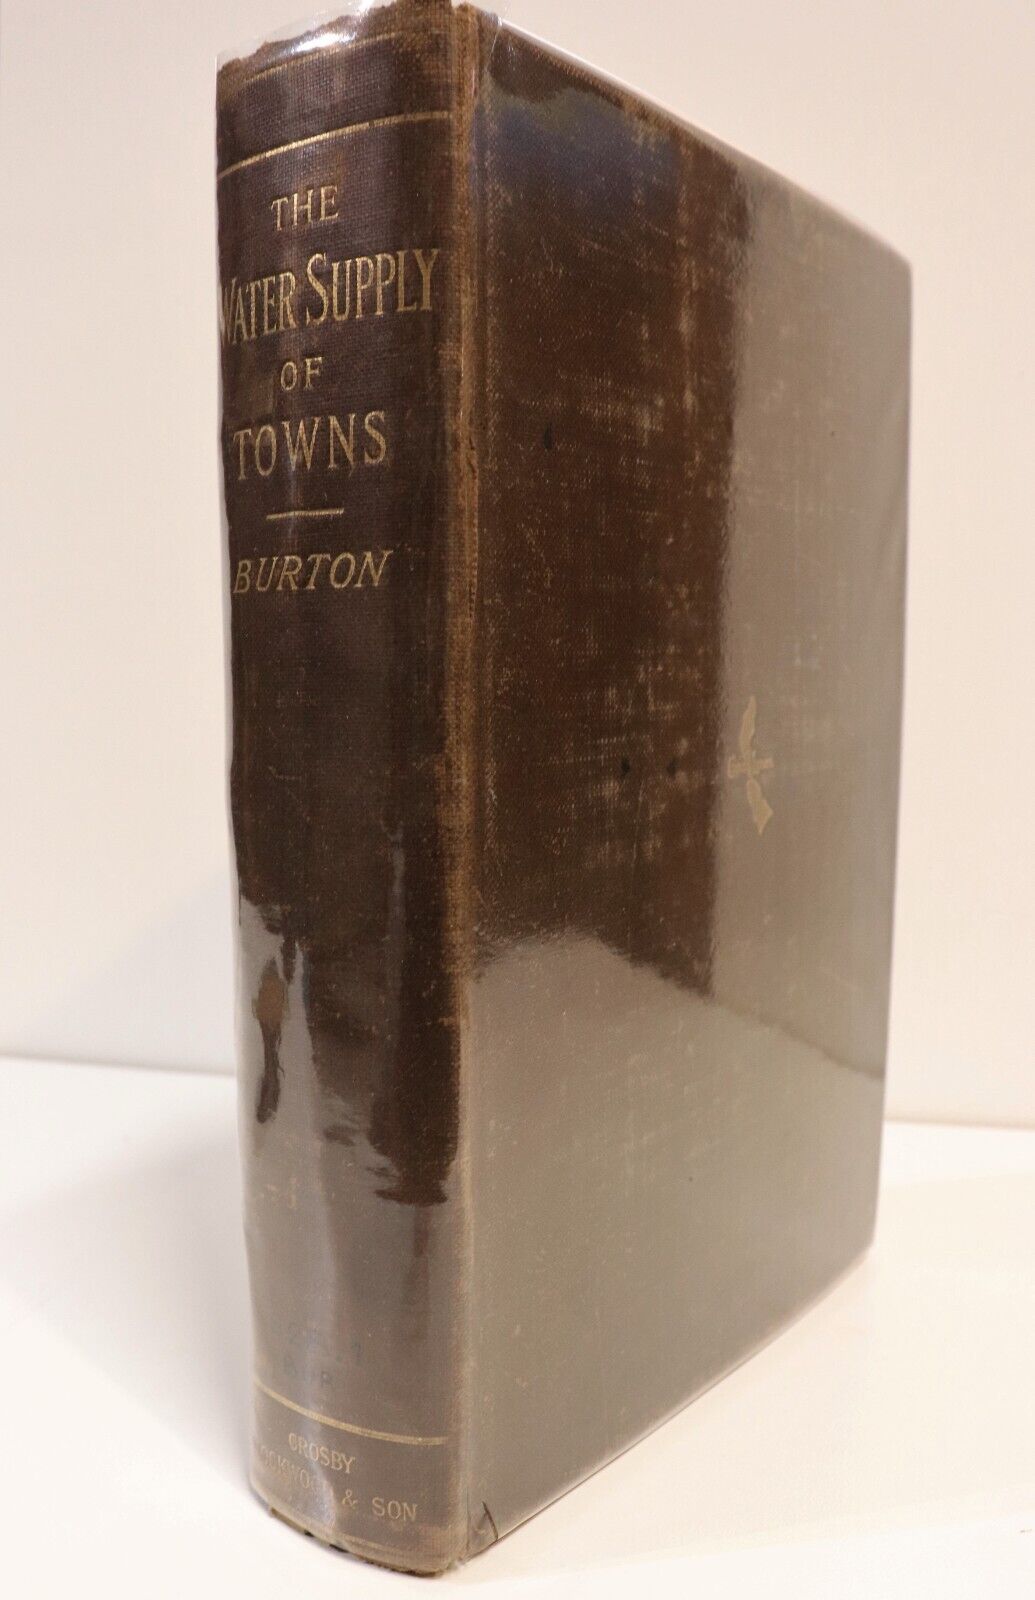 The Water Supply Of Towns by W.K. Burton - 1898 - Antique Town Planning Book